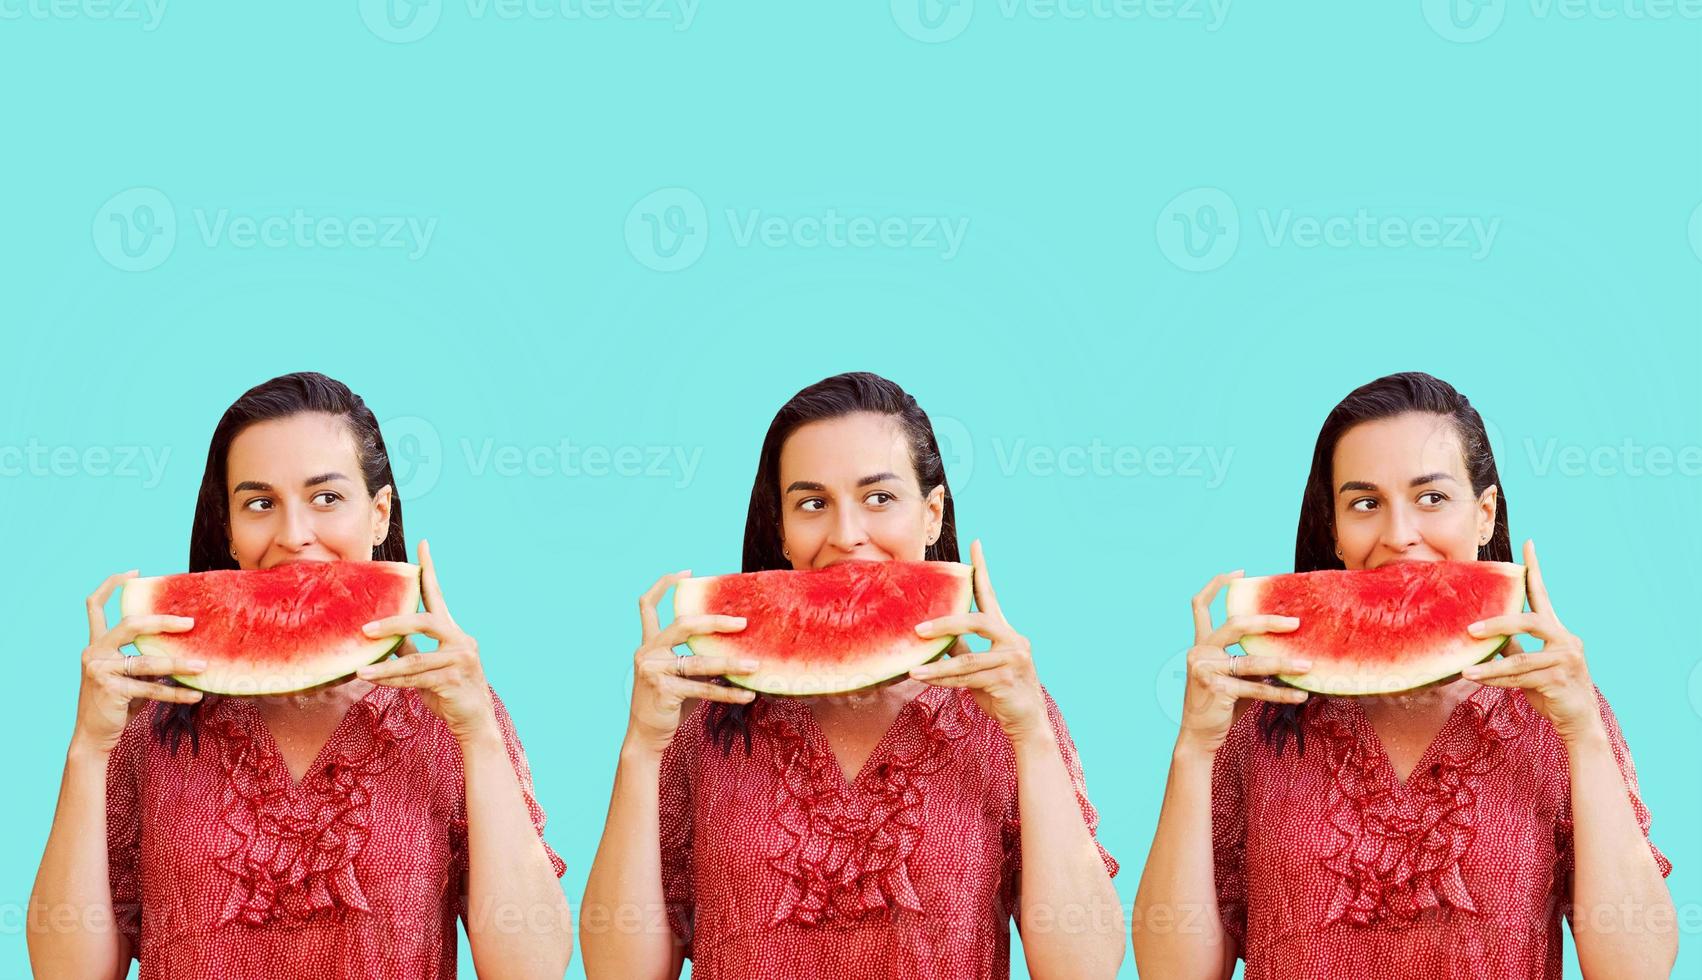 Pattern of cheerful woman holding a piece of sliced watermelon on a colorful background. Summer concept photo